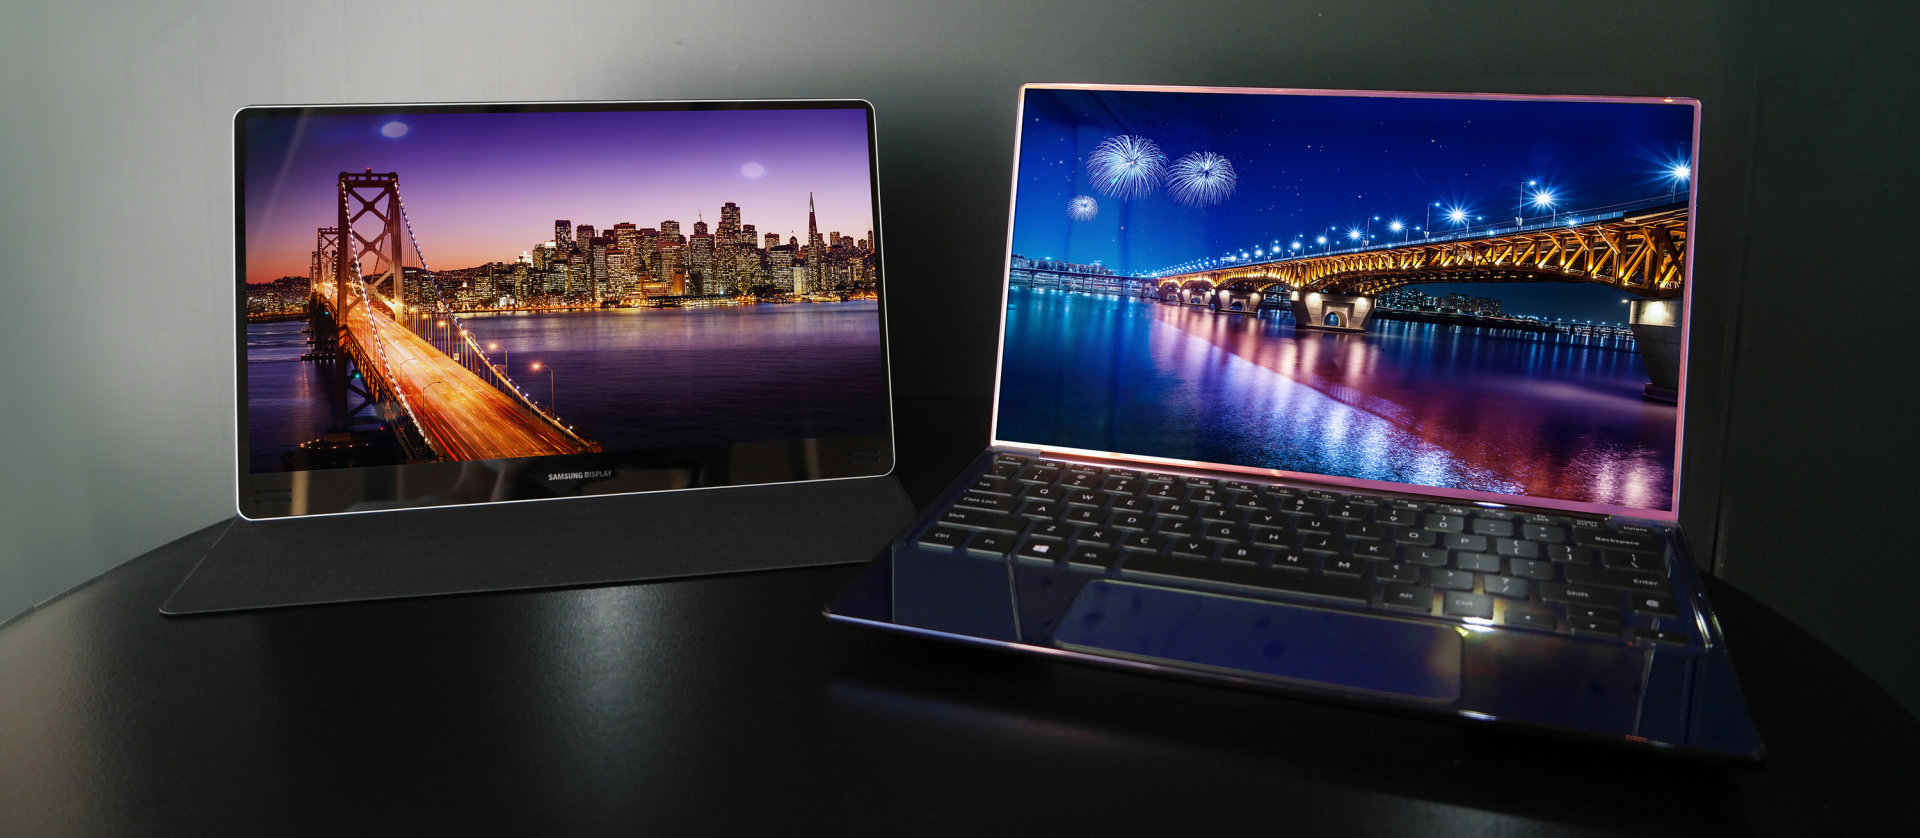 A Dell XPS 15 with a foldable dual-screen OLED display could be a reality  in the near future -  News